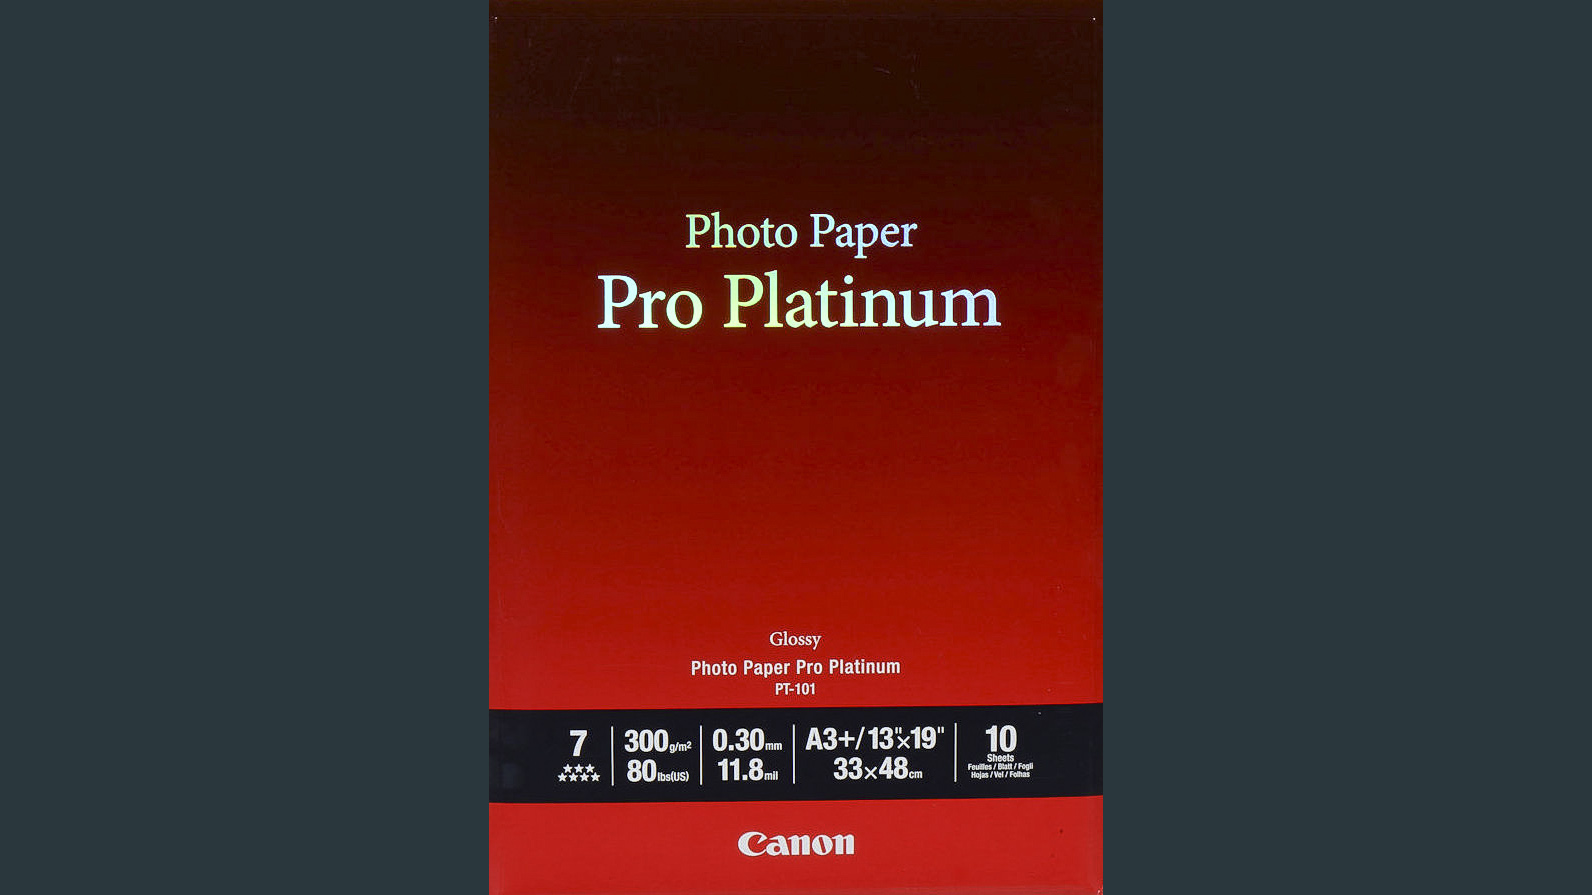 Canon Pro Platinum PT-101, one of the best photo papers